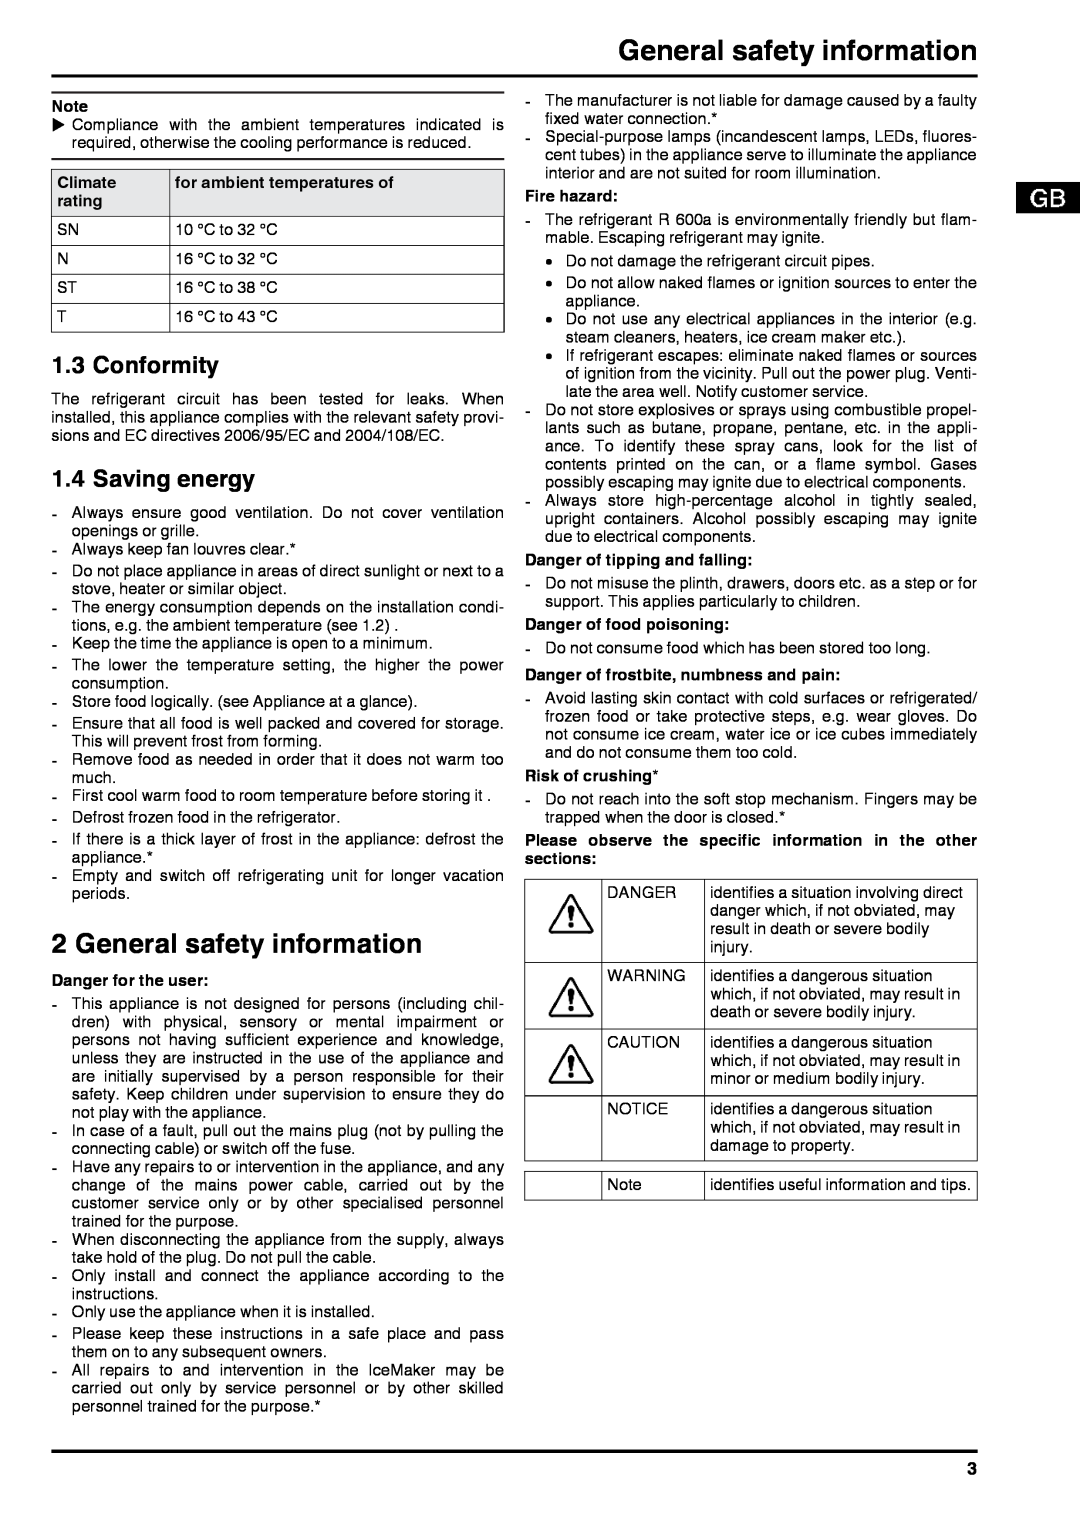 Liebherr 7084284-03 General safety information, Conformity, Saving energy, Climate, for ambient temperatures of, rating 